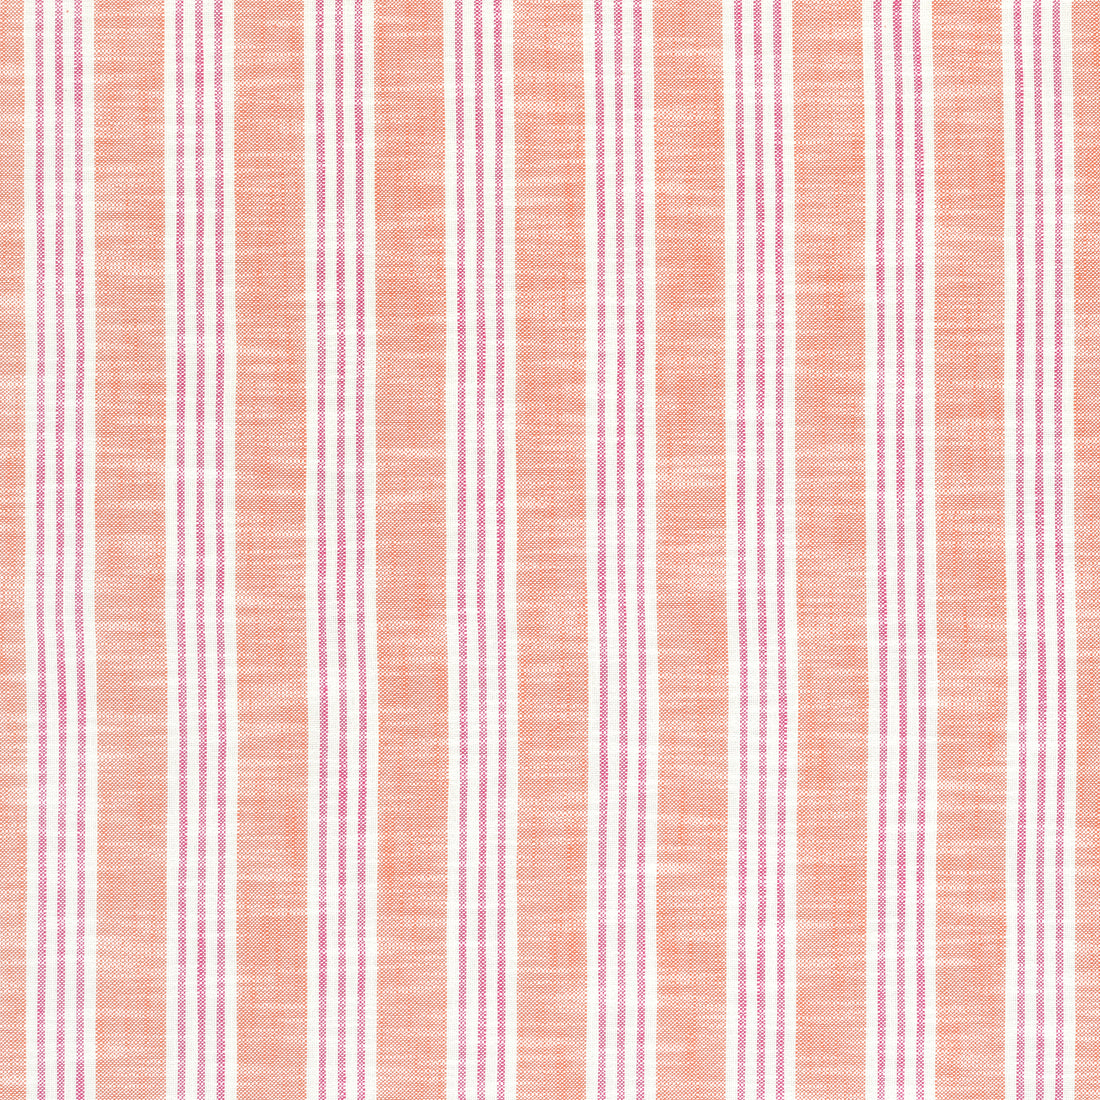 Southport Stripe fabric in coral and peony color - pattern number W73491 - by Thibaut in the Landmark collection